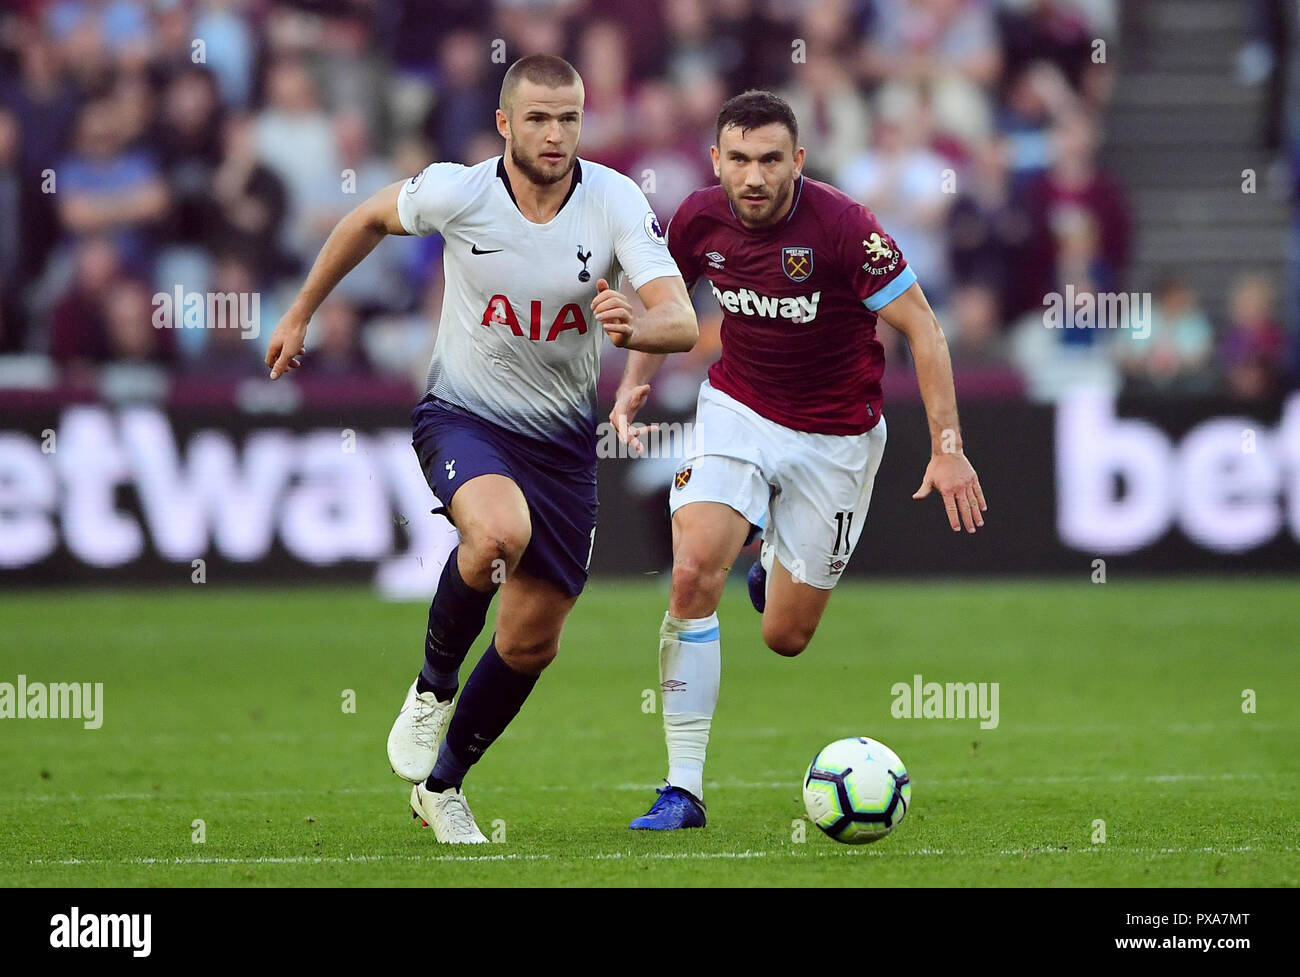 Tottenham Hotspur's Eric Dier (left) and West Ham United's Robert Snodgrass battle for the ball during the Premier League match at London Stadium. Stock Photo